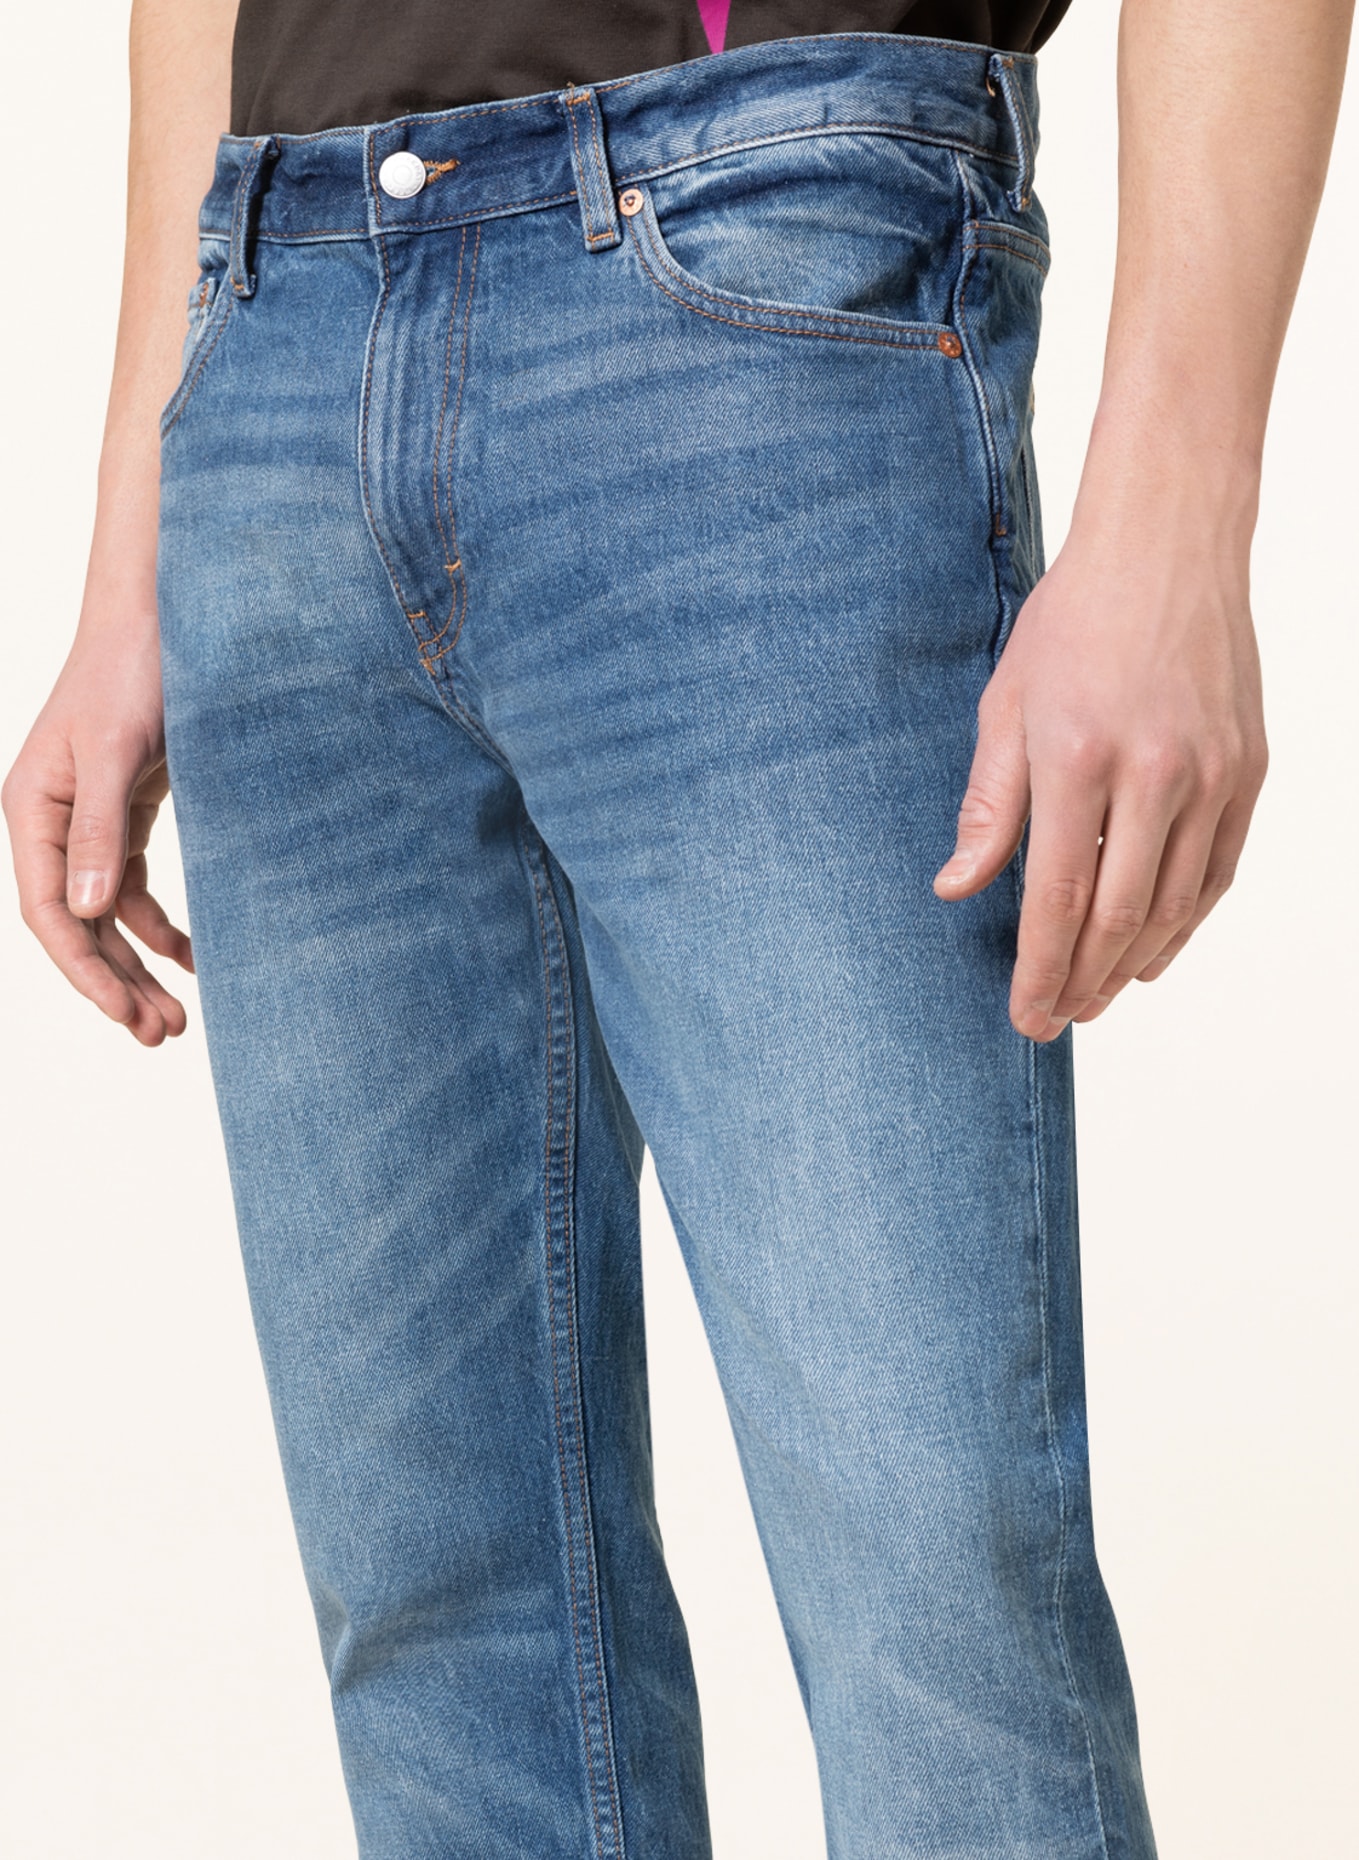 WEEKDAY Jeans EASY Regular Straight Fit, Farbe: 75-101 Wave blue (Bild 5)